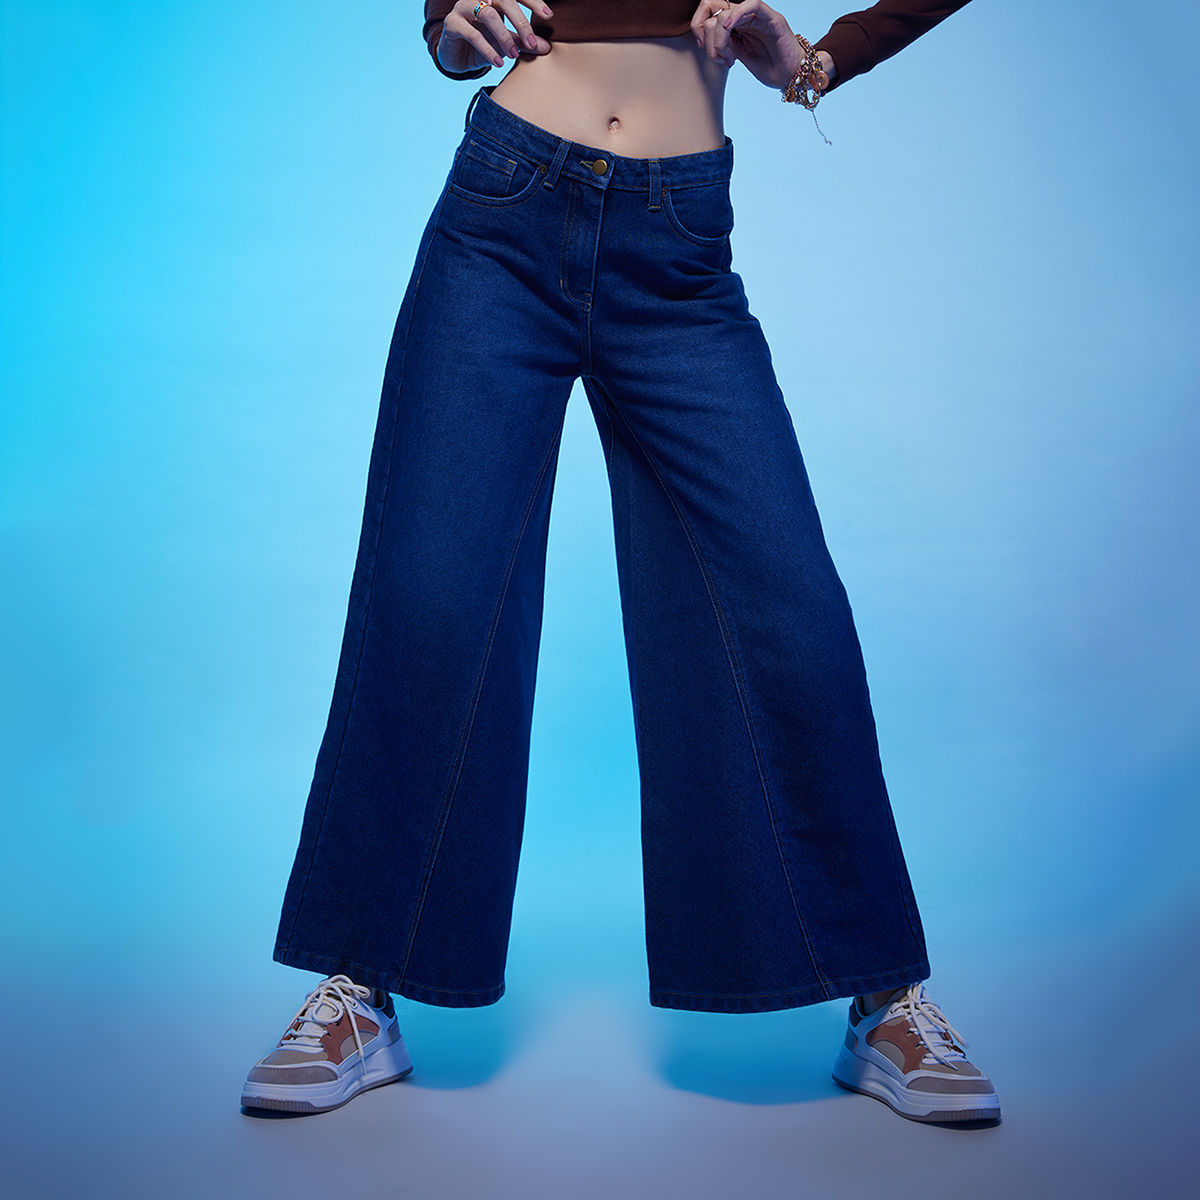 MIXT by Nykaa Fashion Jeans  Buy MIXT by Nykaa Fashion Blue Wide Leg Chain  And Slit Pattern Denim Jeans Online  Nykaa Fashion